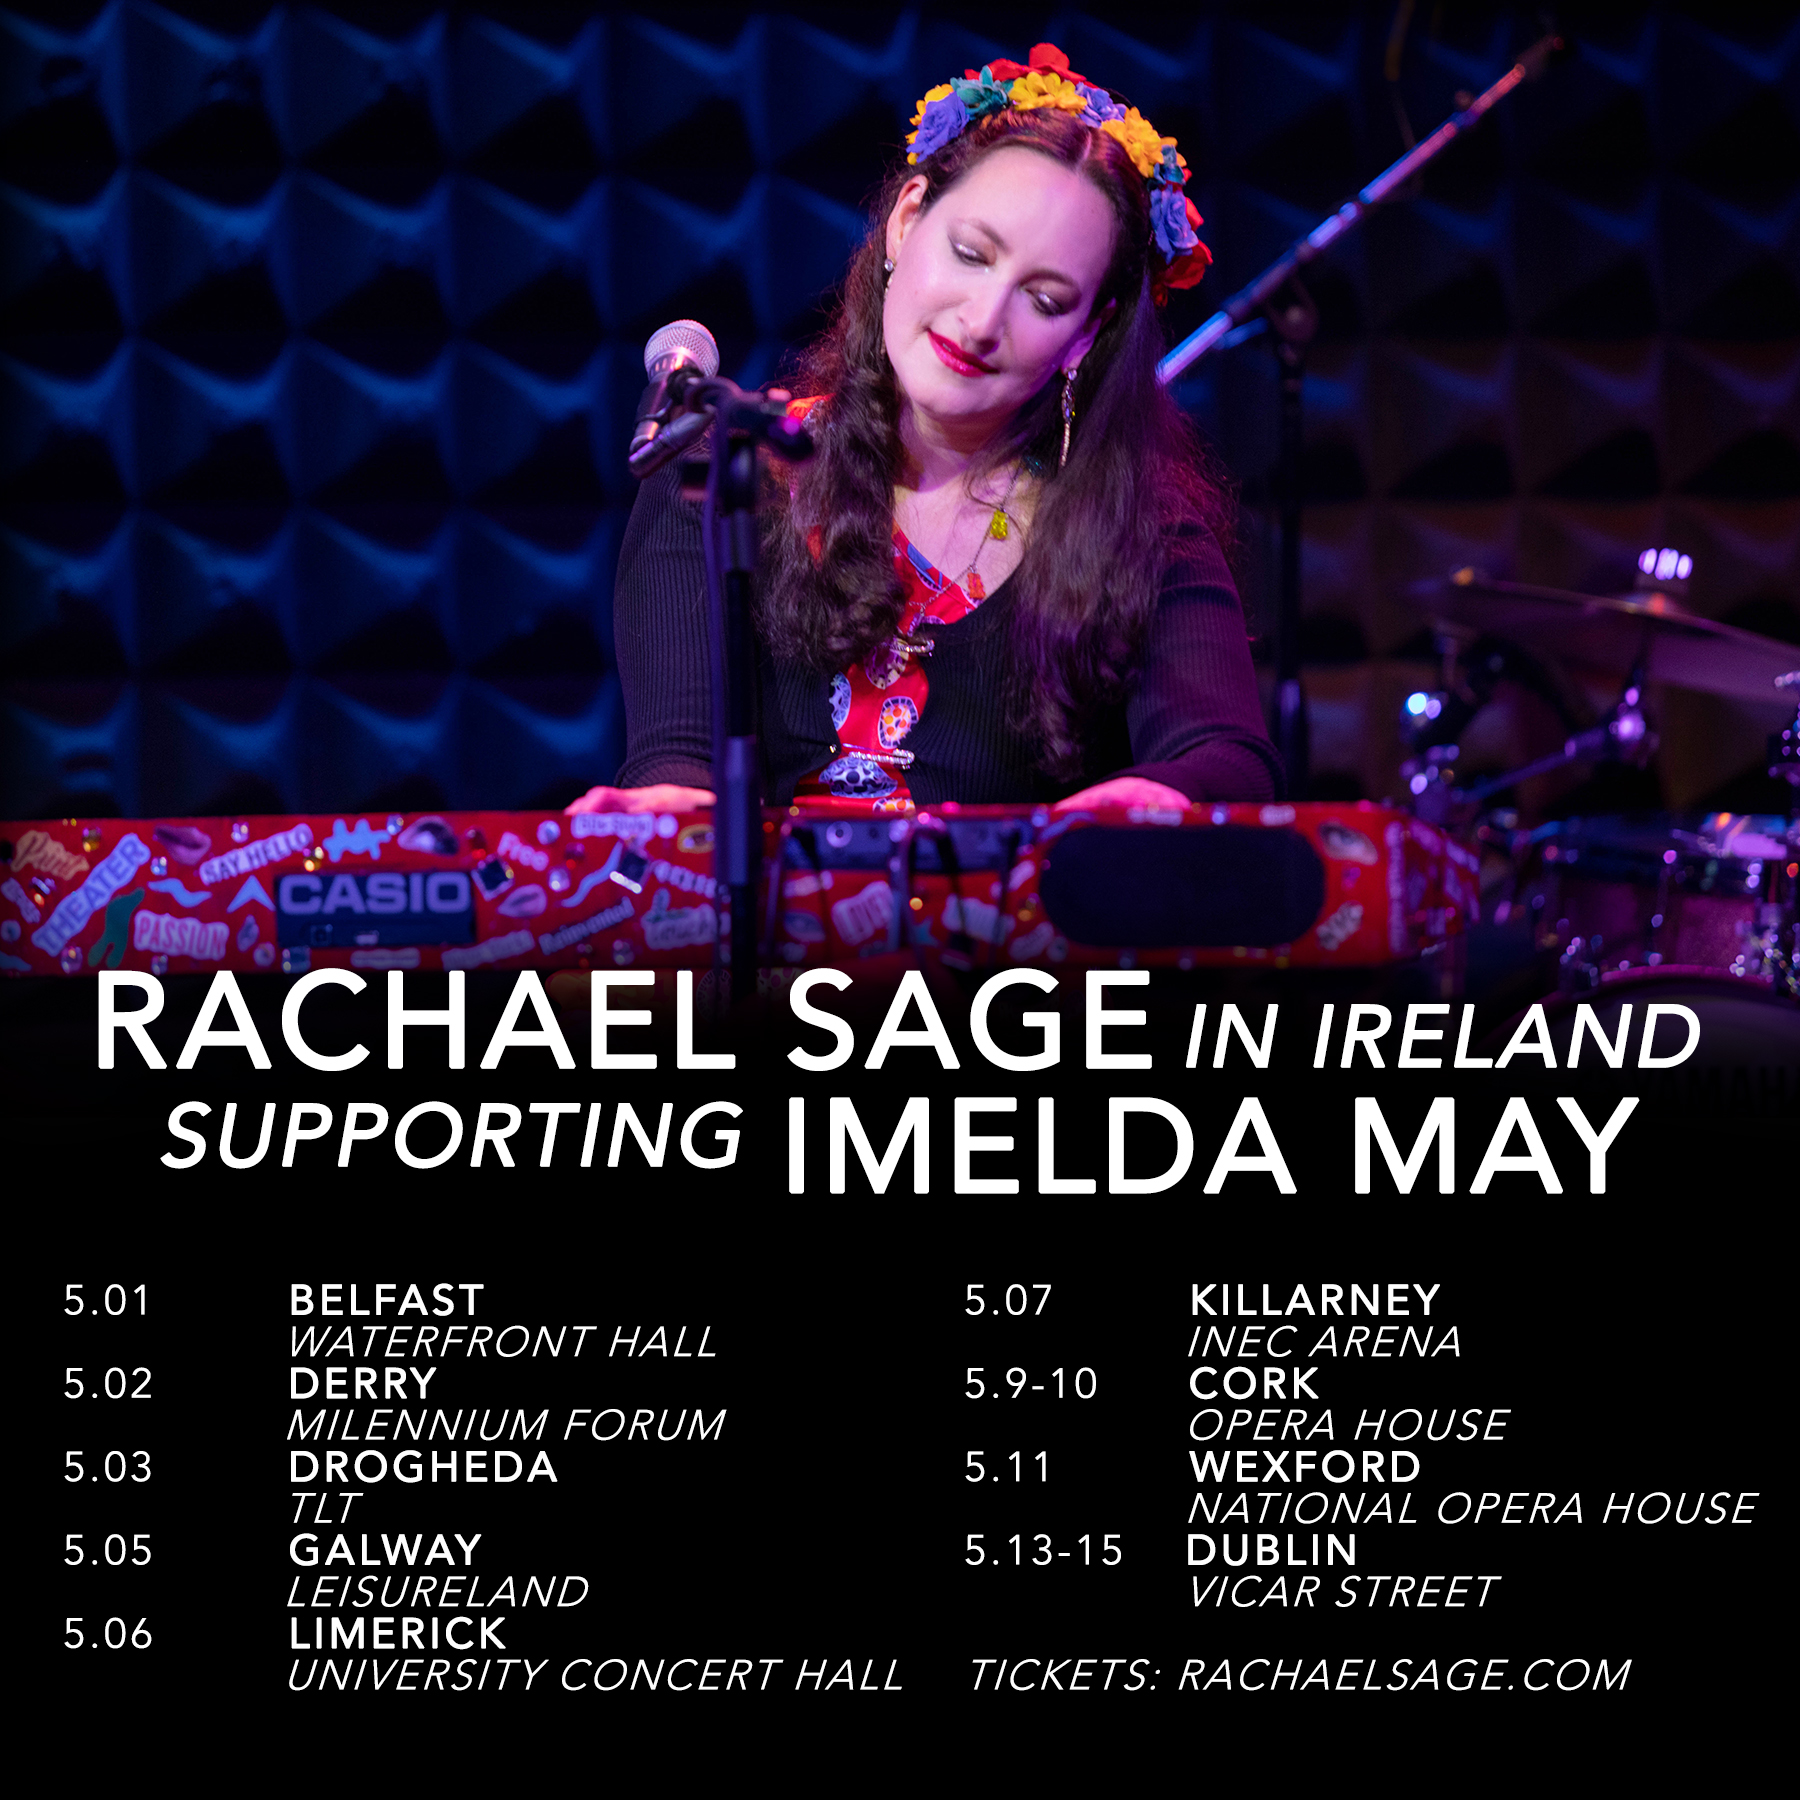 Rachael Sage On Tour Supporting Imelda May In Ireland, May 2022